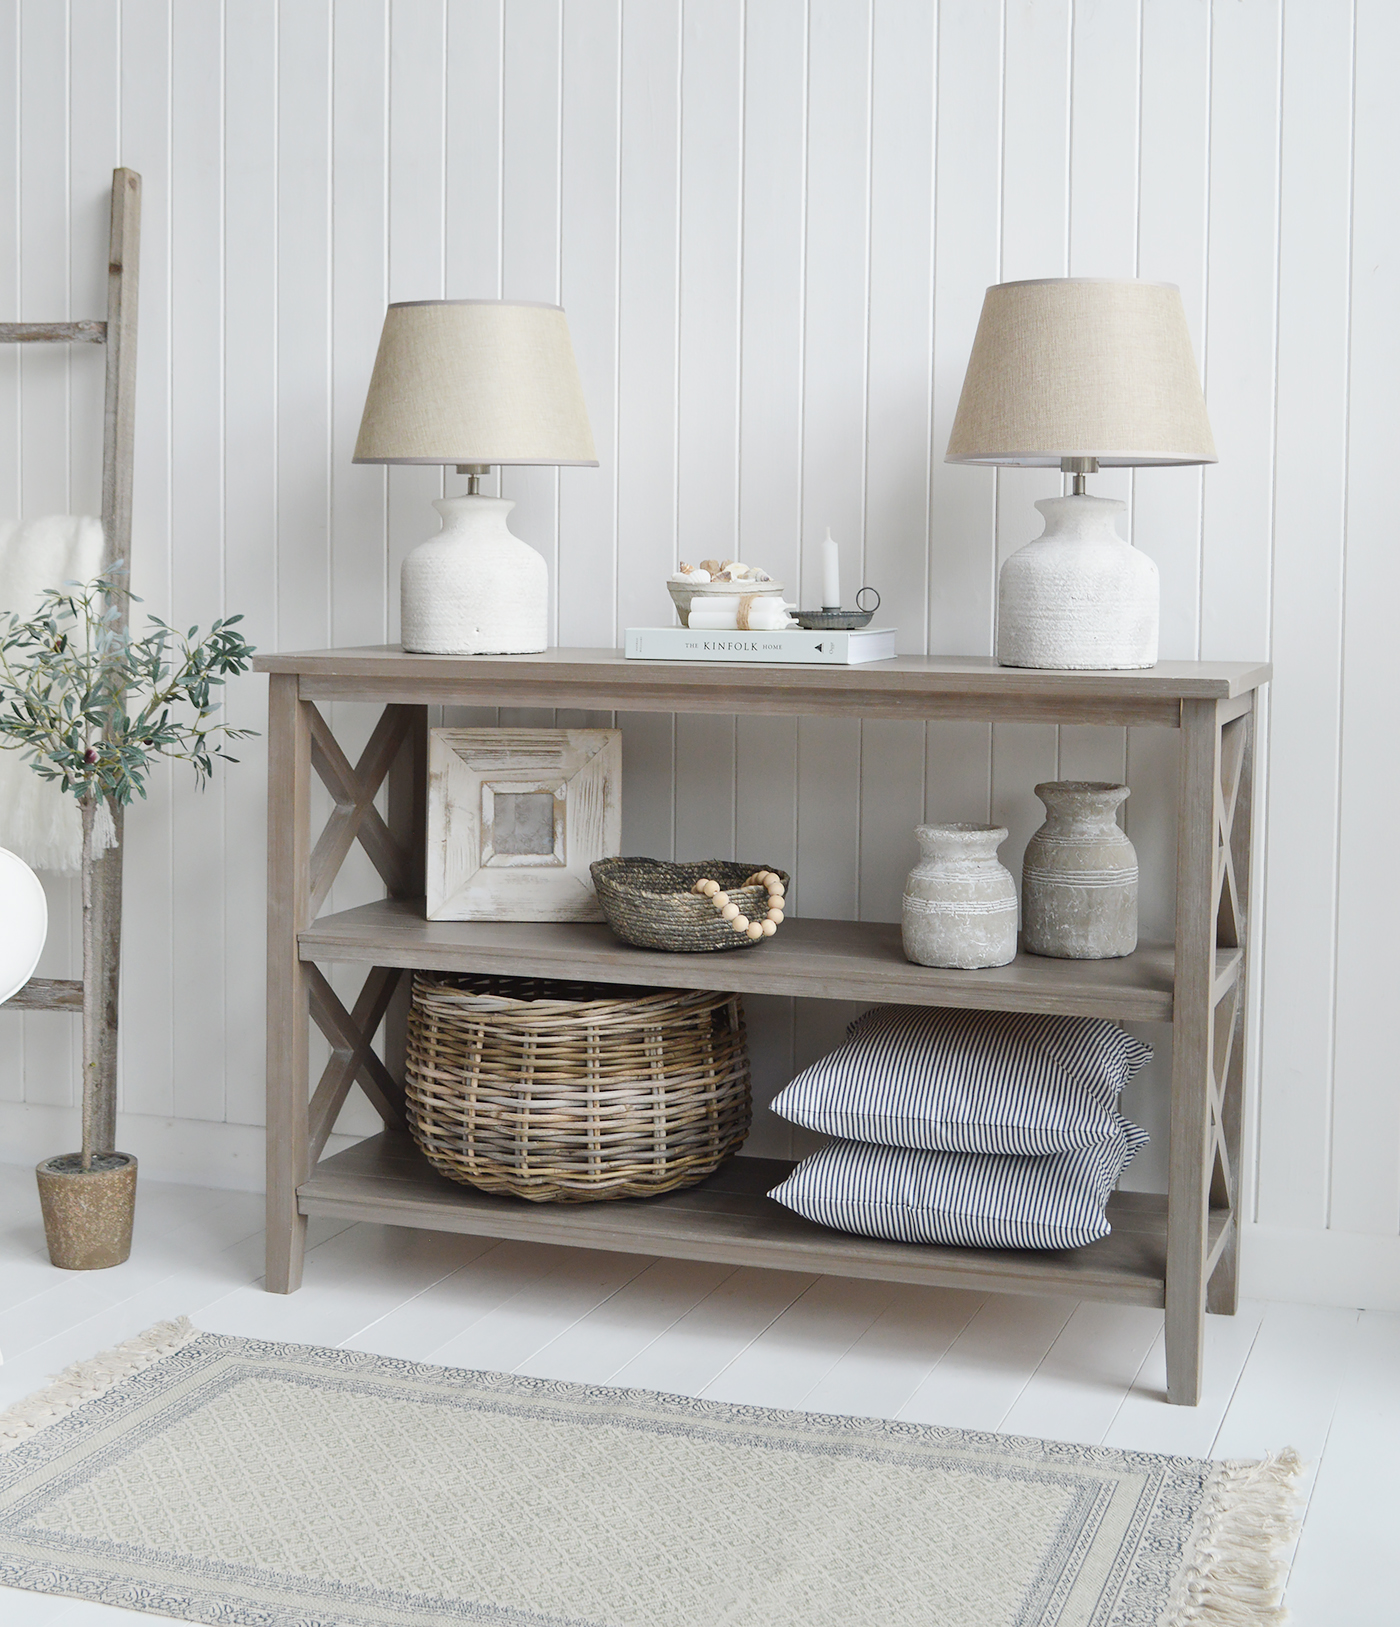 Cambridge Console Table - New England Interiors Furniture for Coastal, Modern Farmhouse and Country Homes